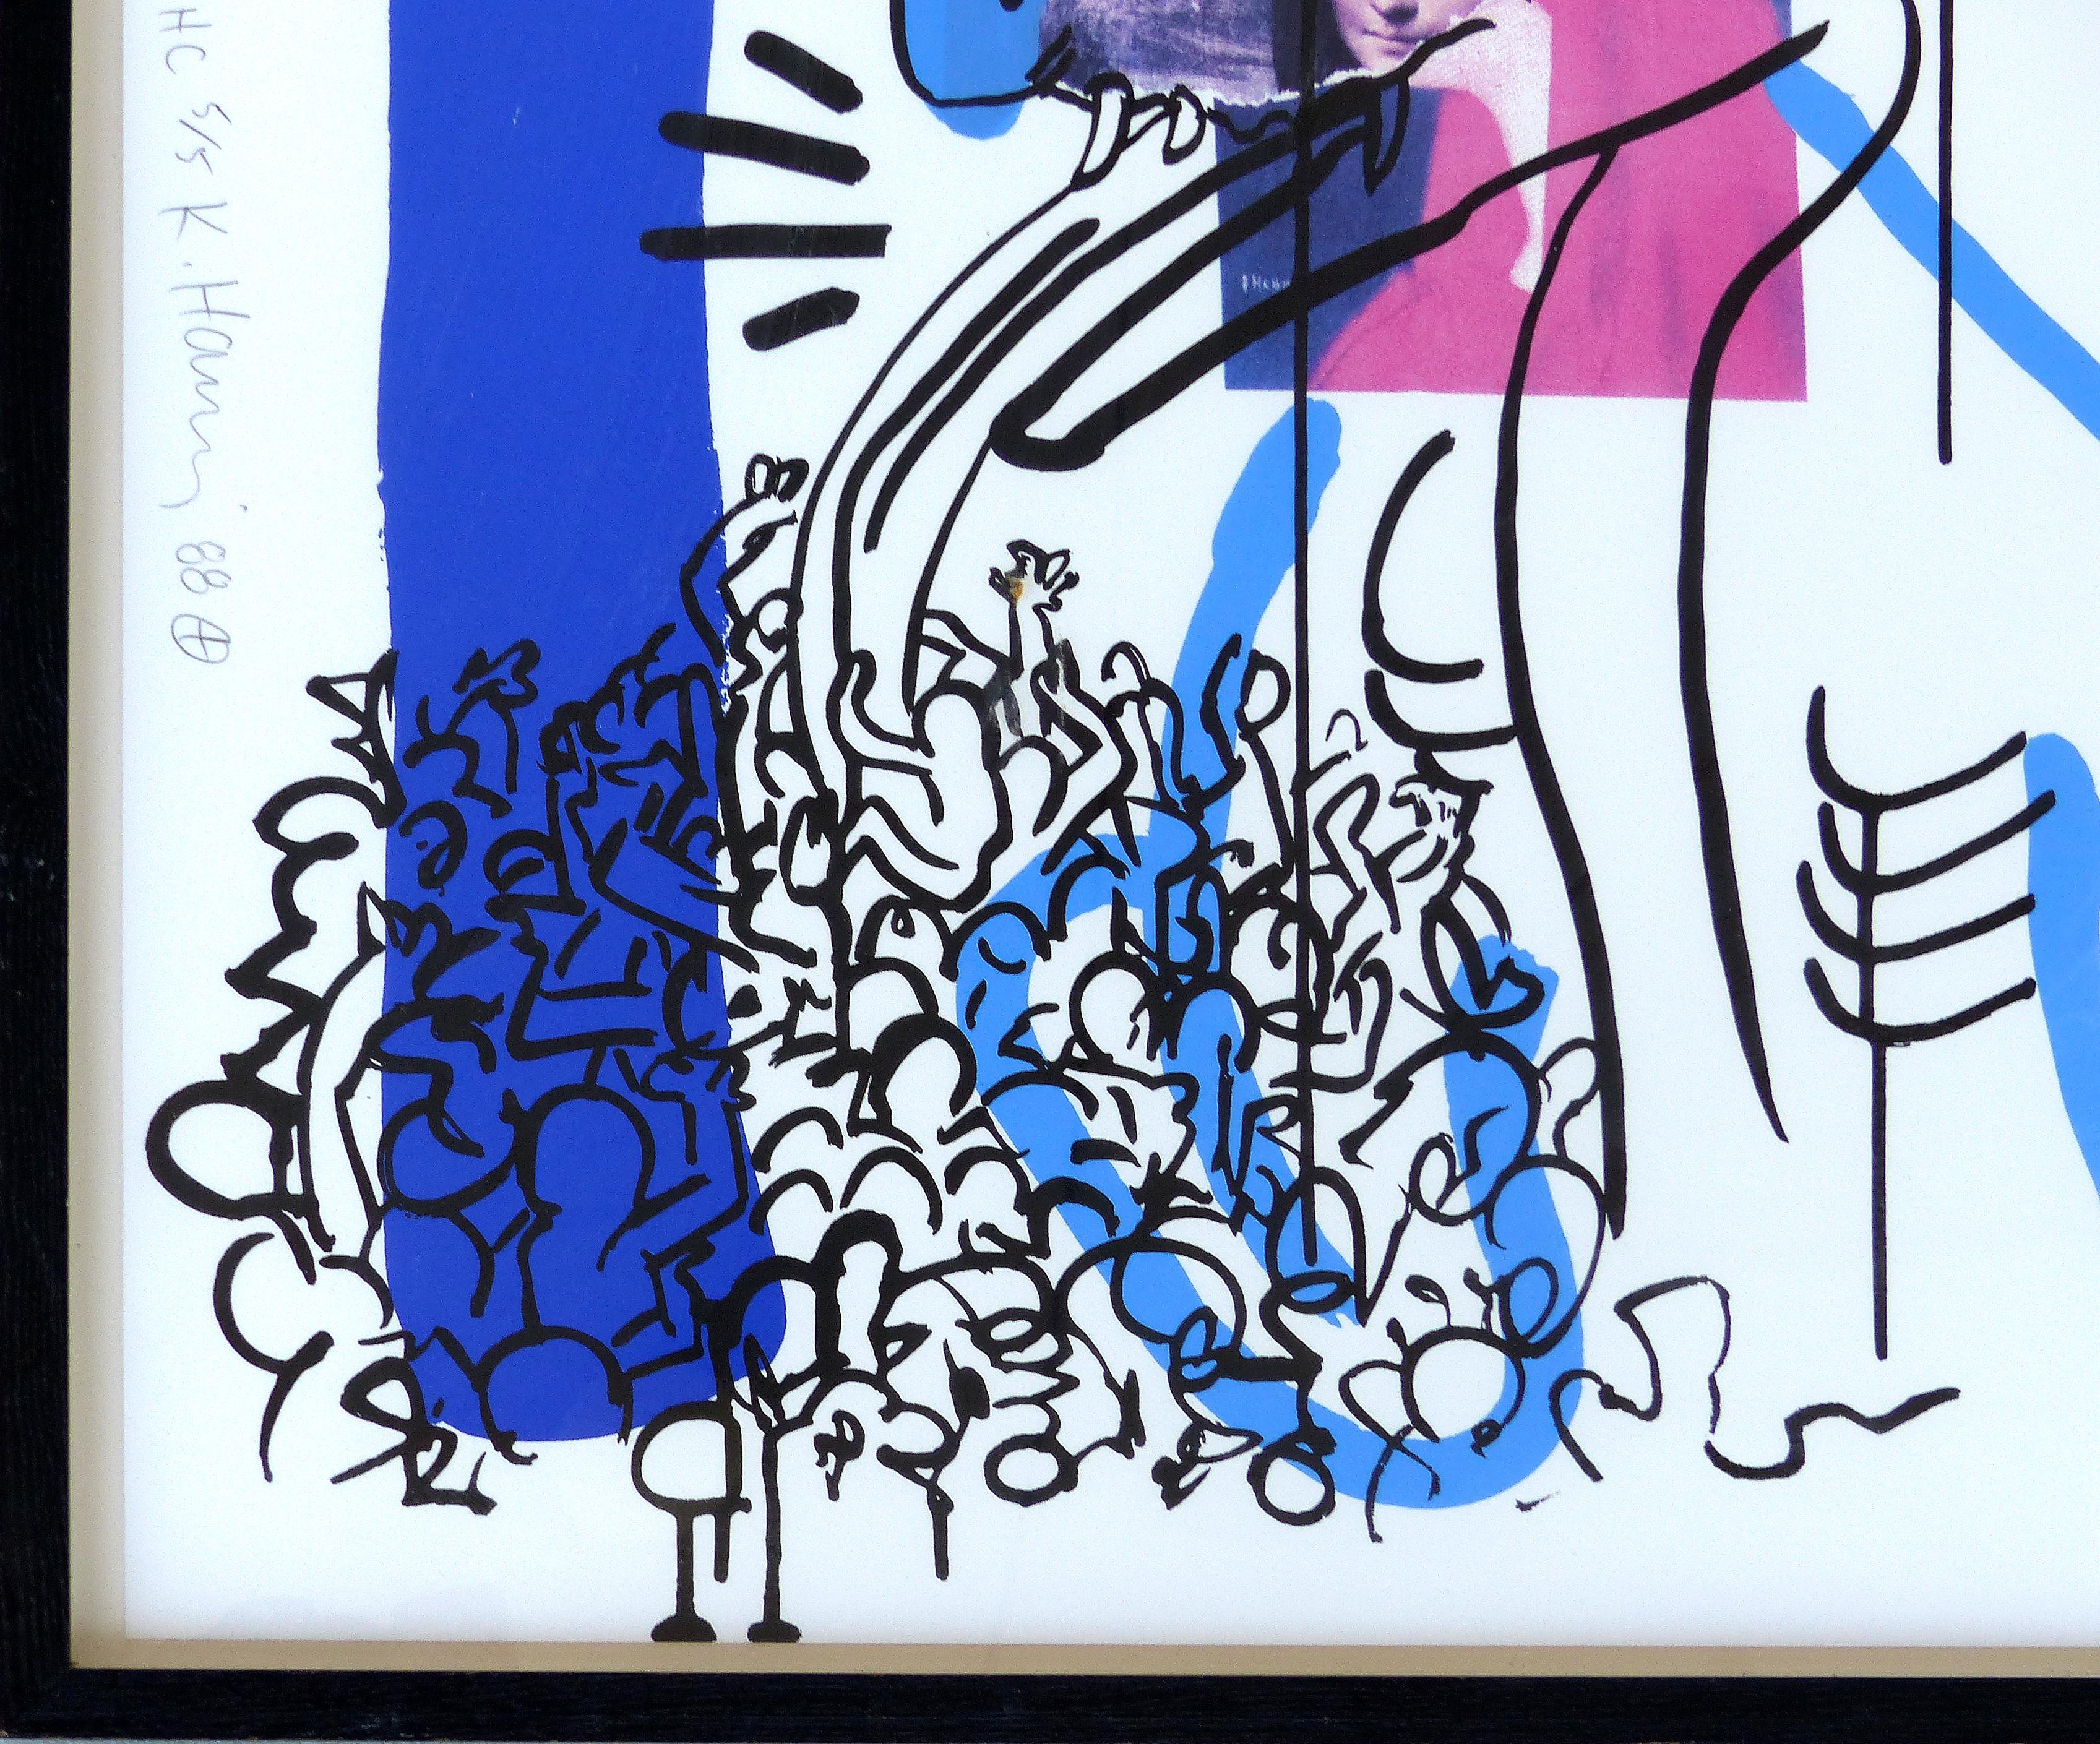 Offered for sale is a large silkscreen print by Keith Haring titled 